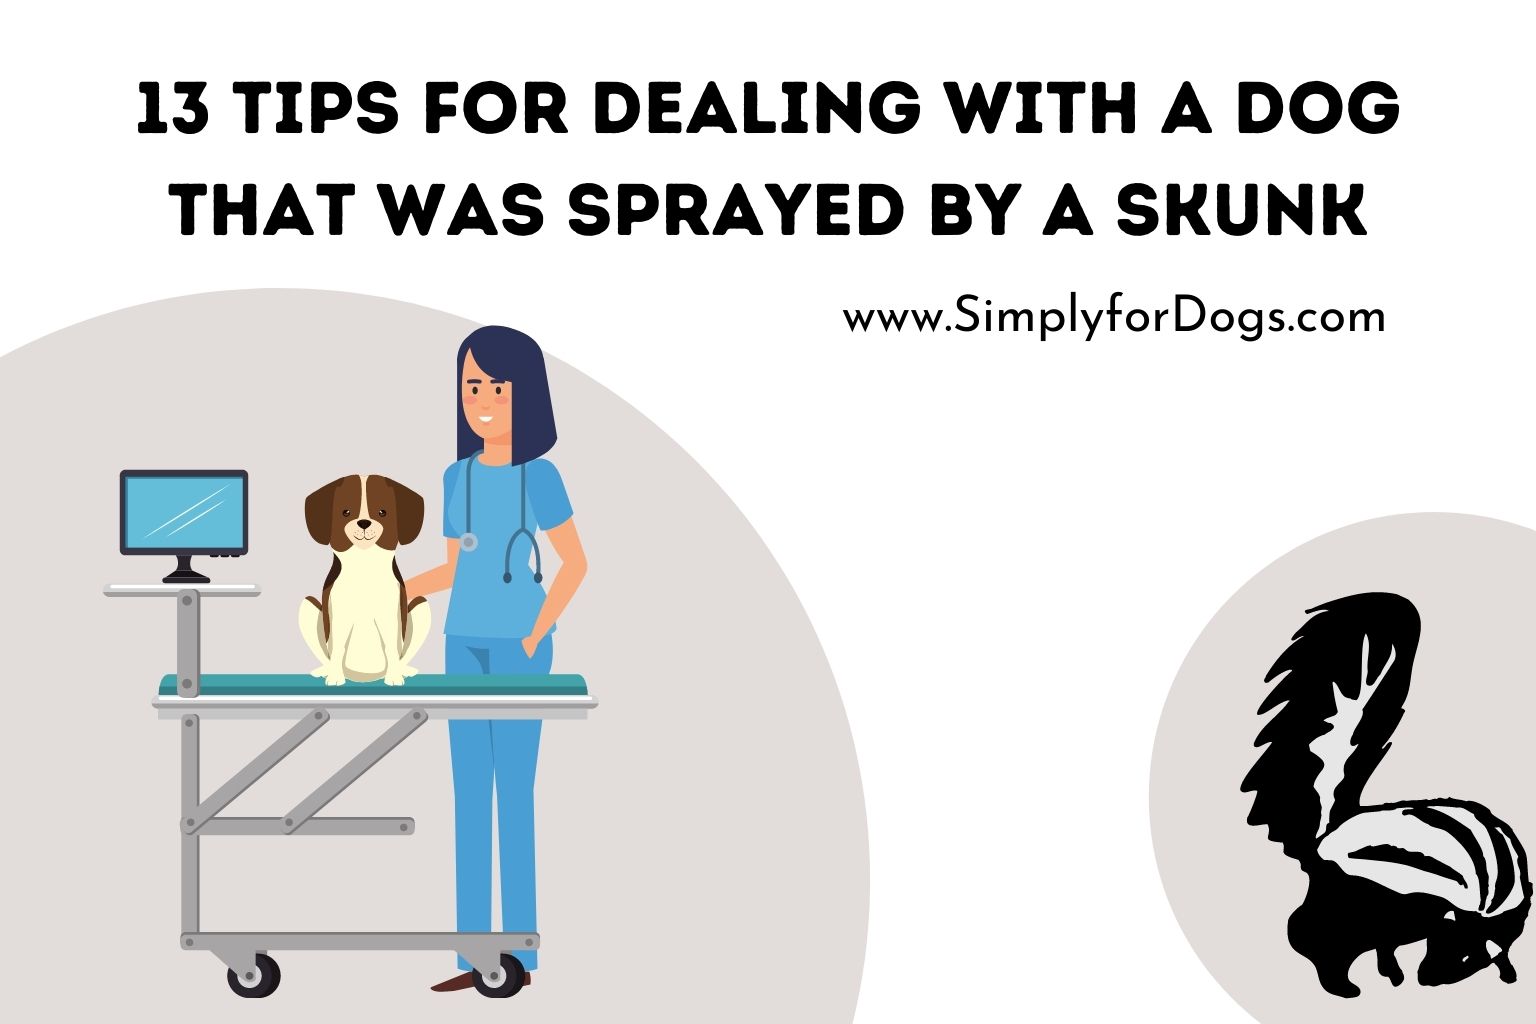 13 Tips for Dealing with a Dog That Was Sprayed by a Skunk